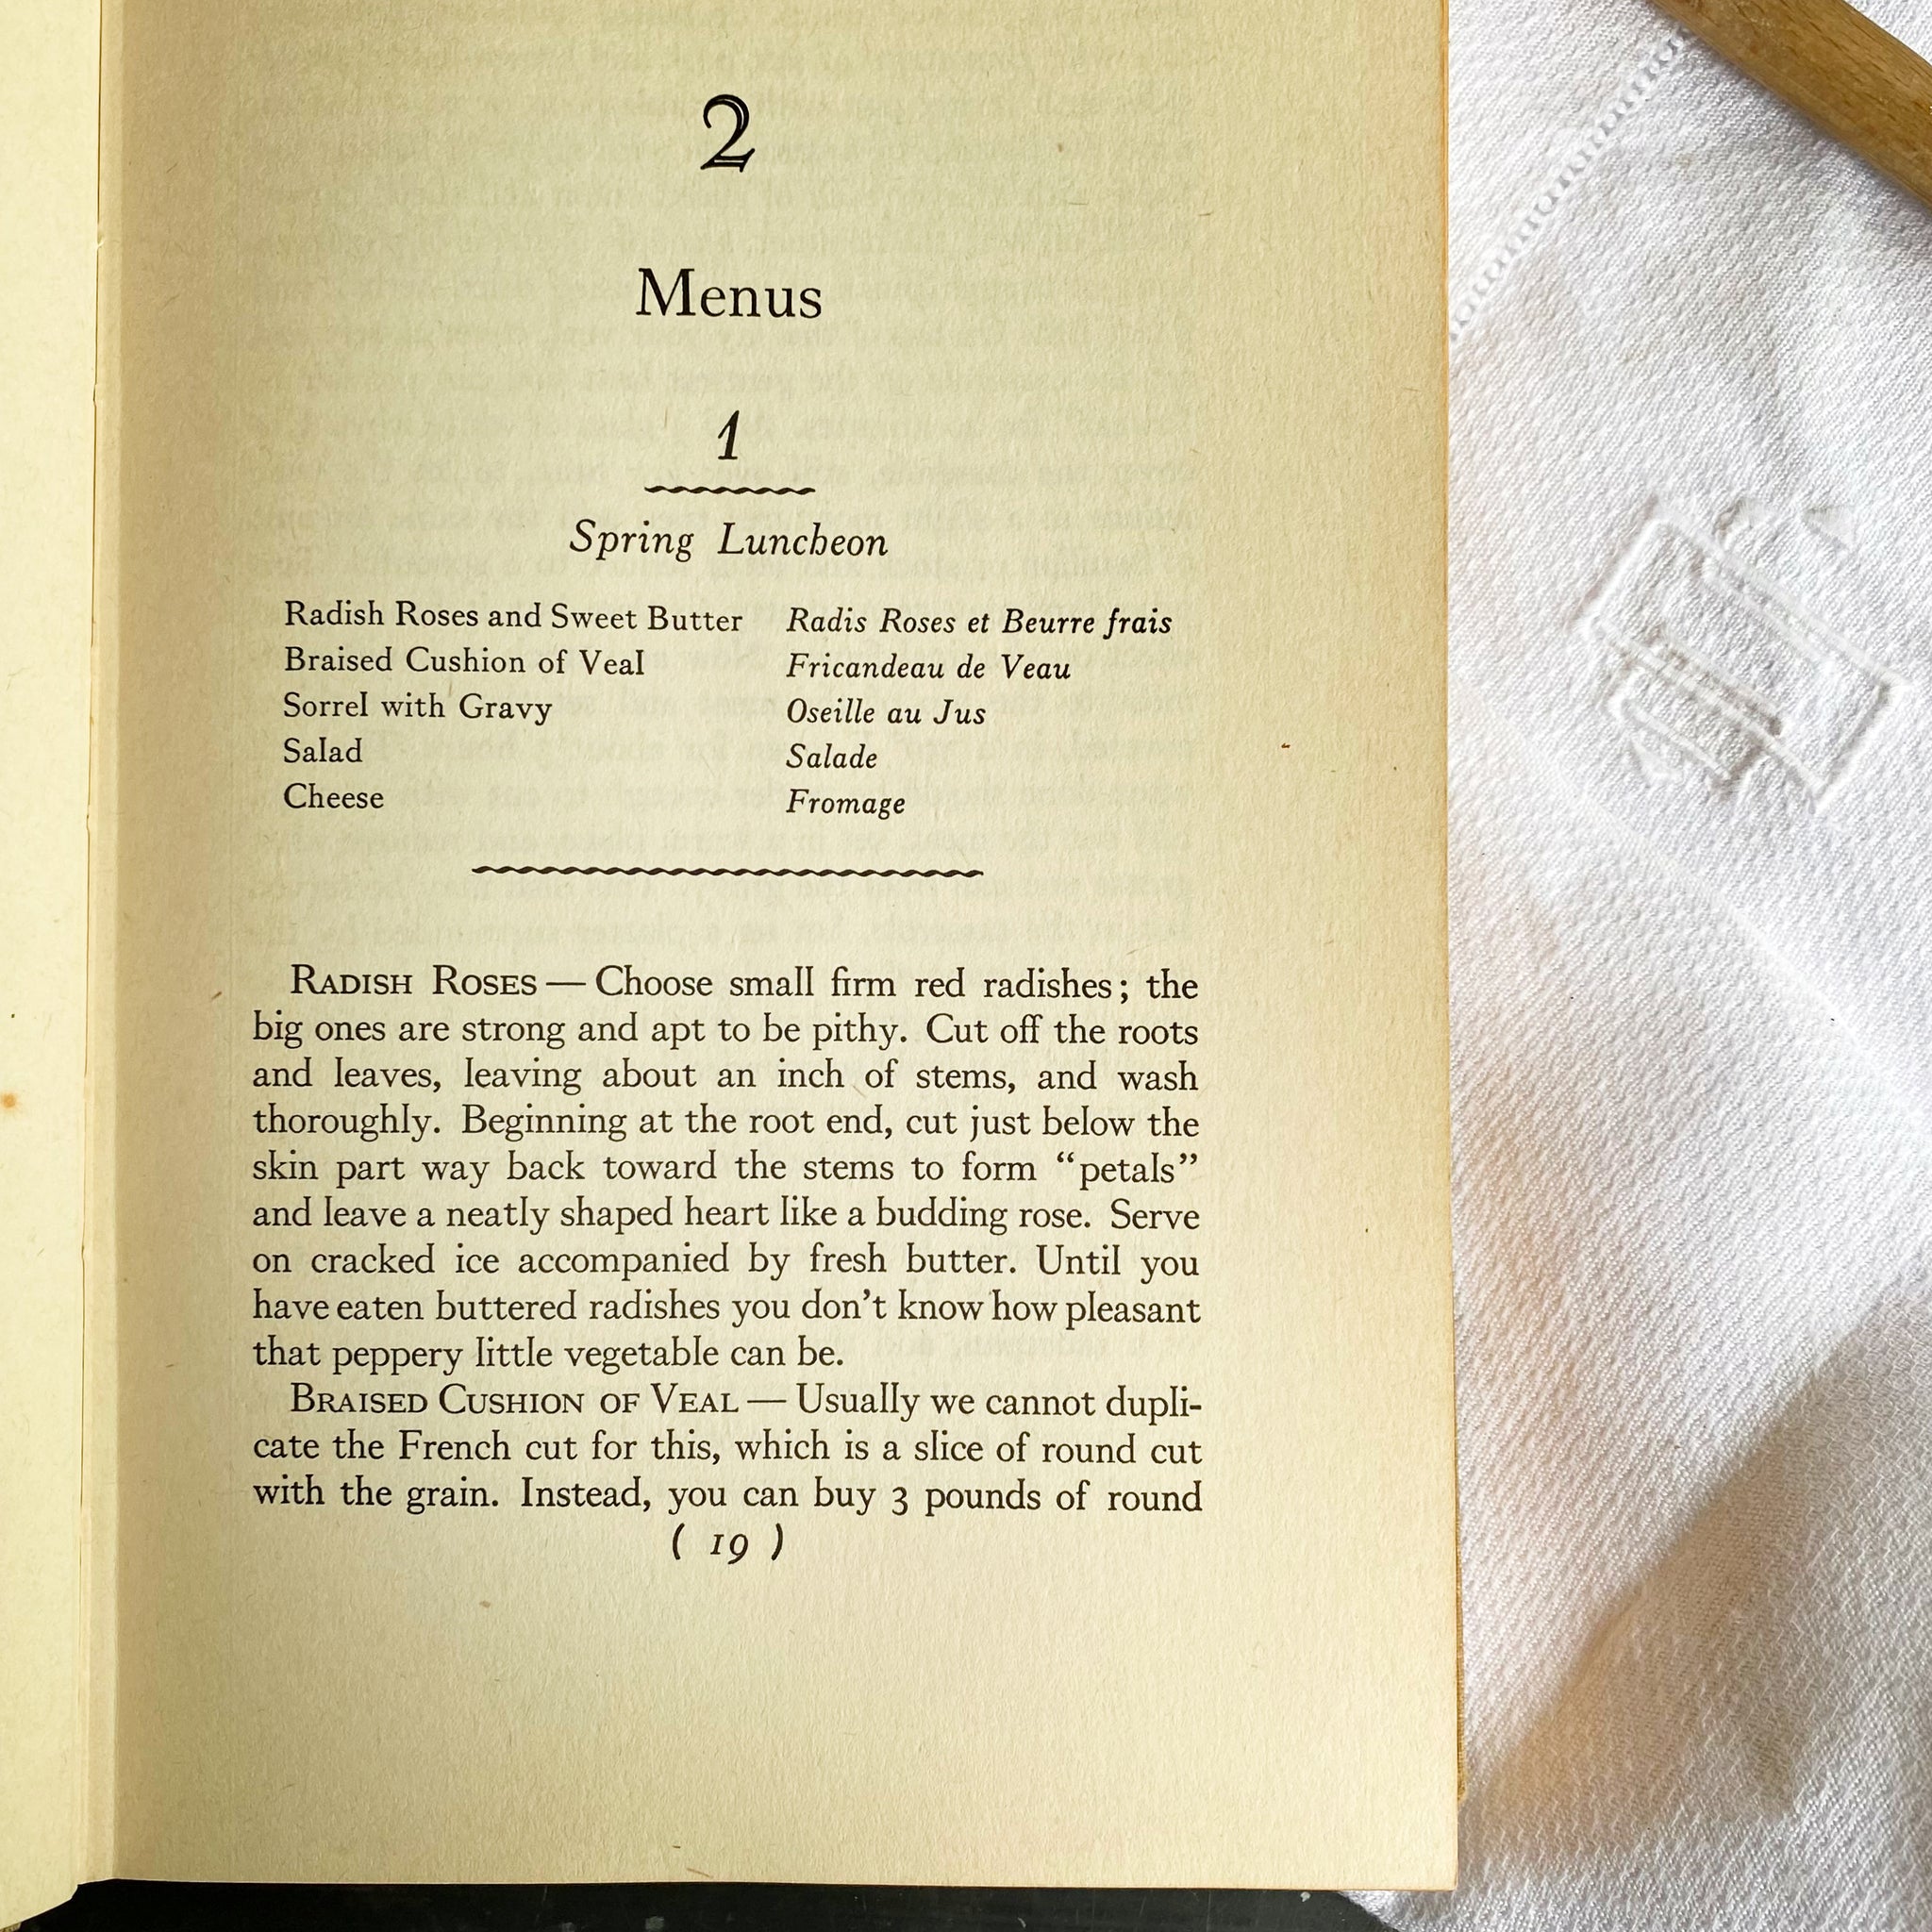 Andre Simon's French Cook Book - 1948 Edition